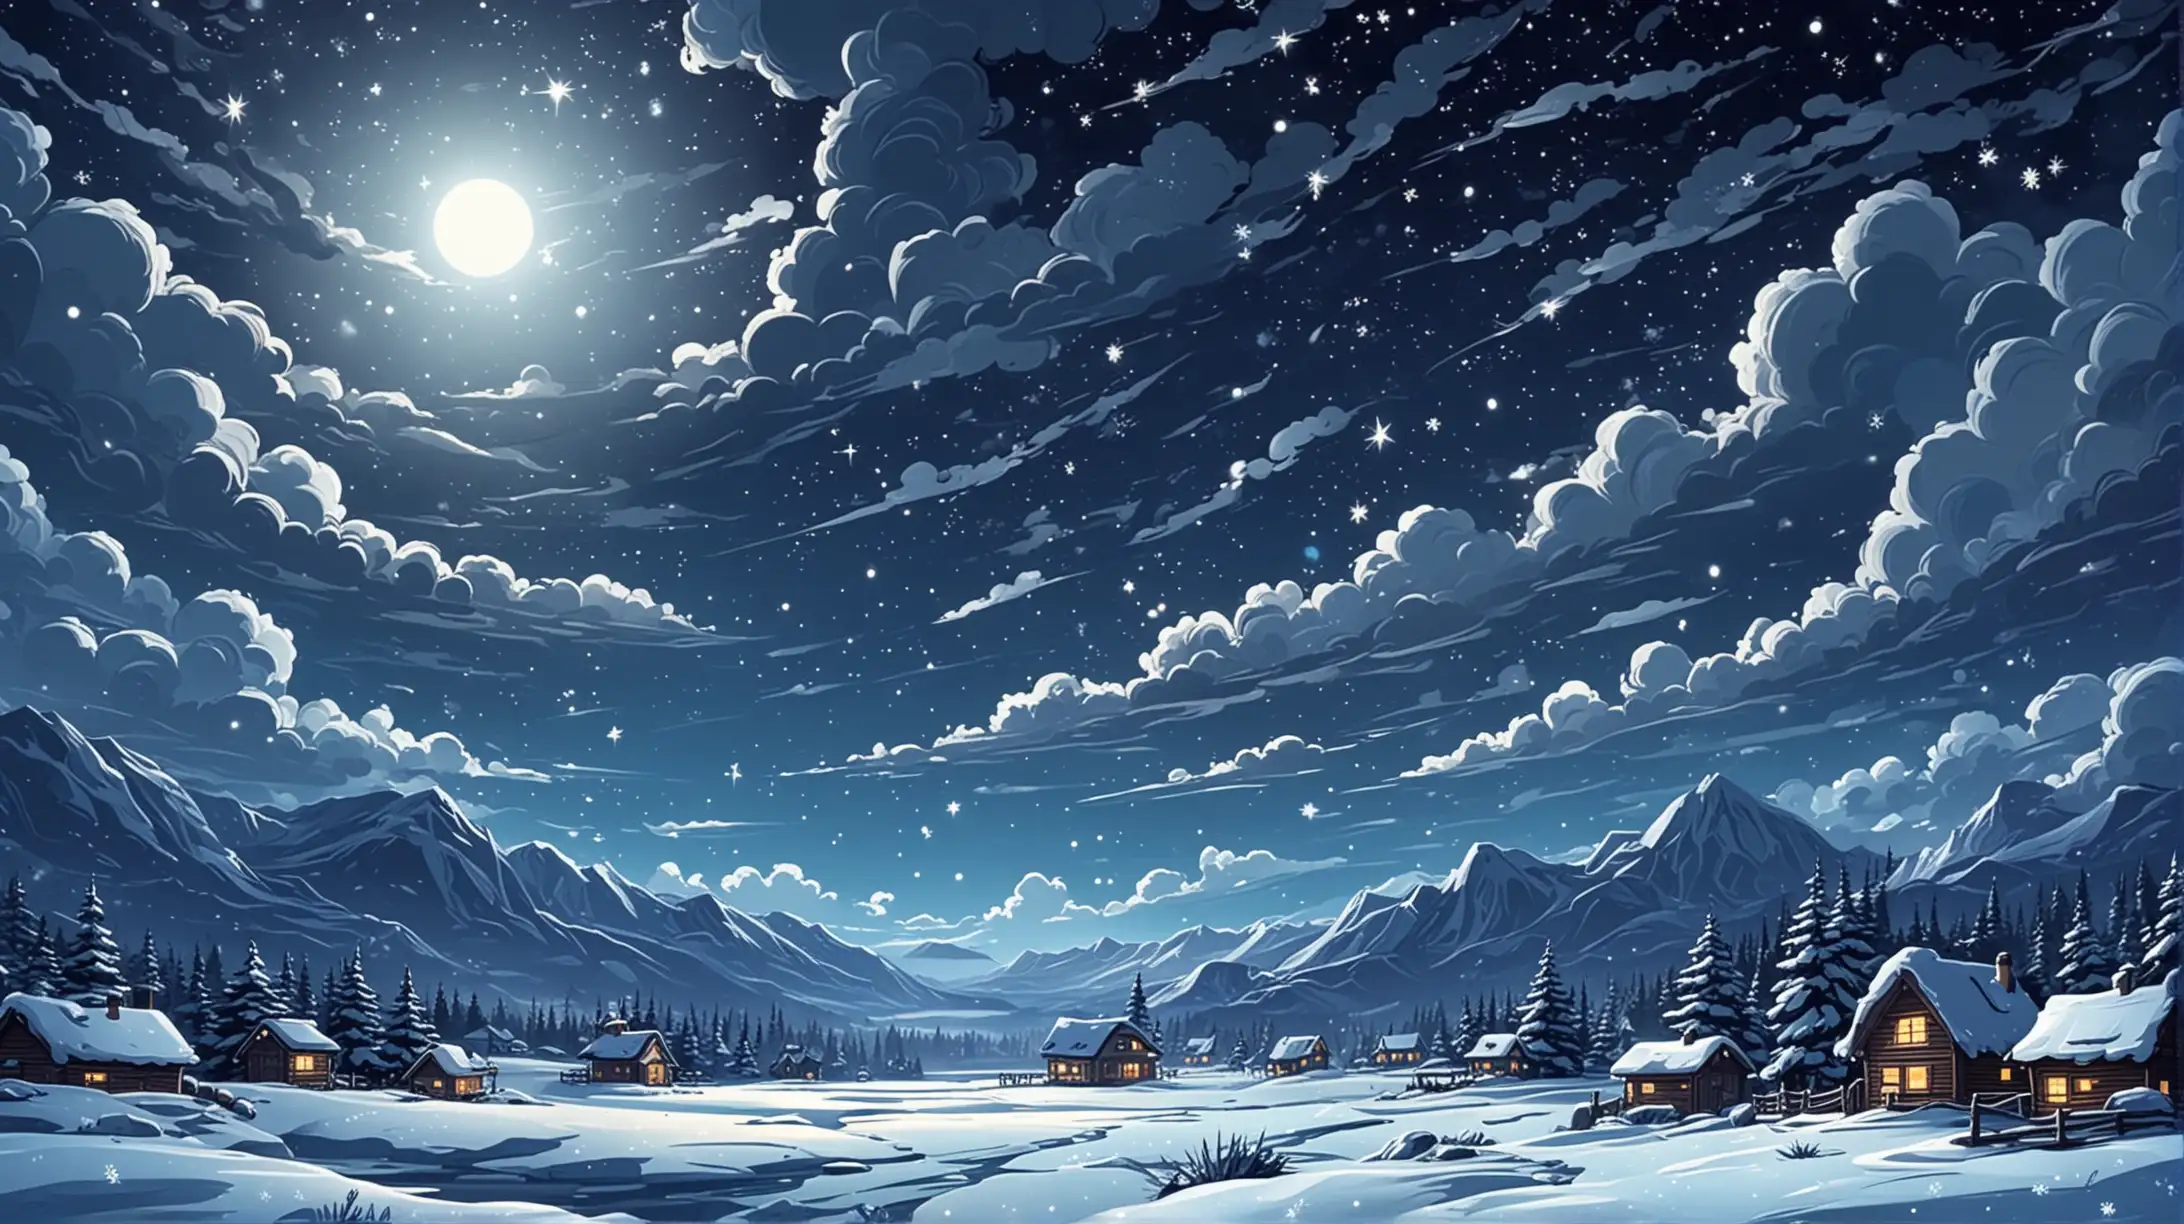 Cartoon Style Winter Night Sky with Whimsical Snowflakes